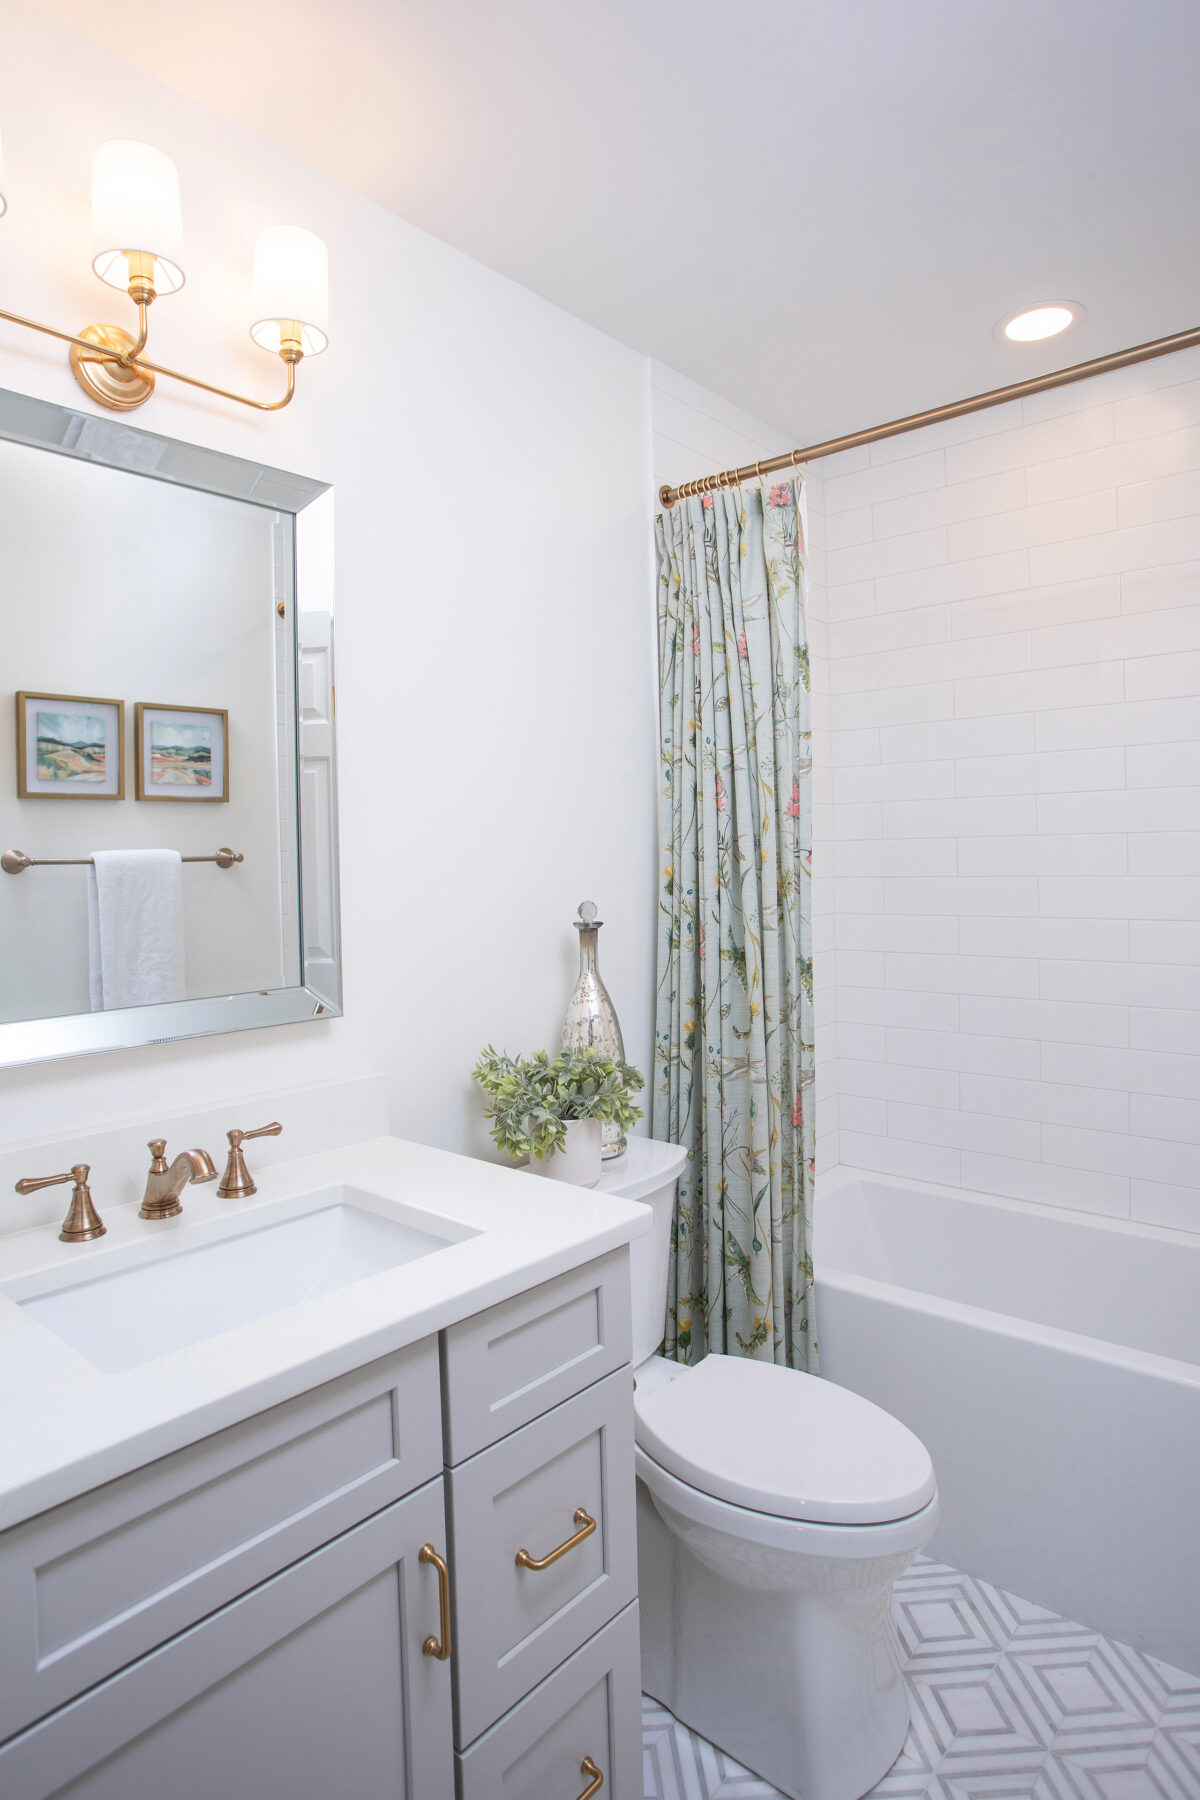 This hall bathroom remodel is fresh and inviting.